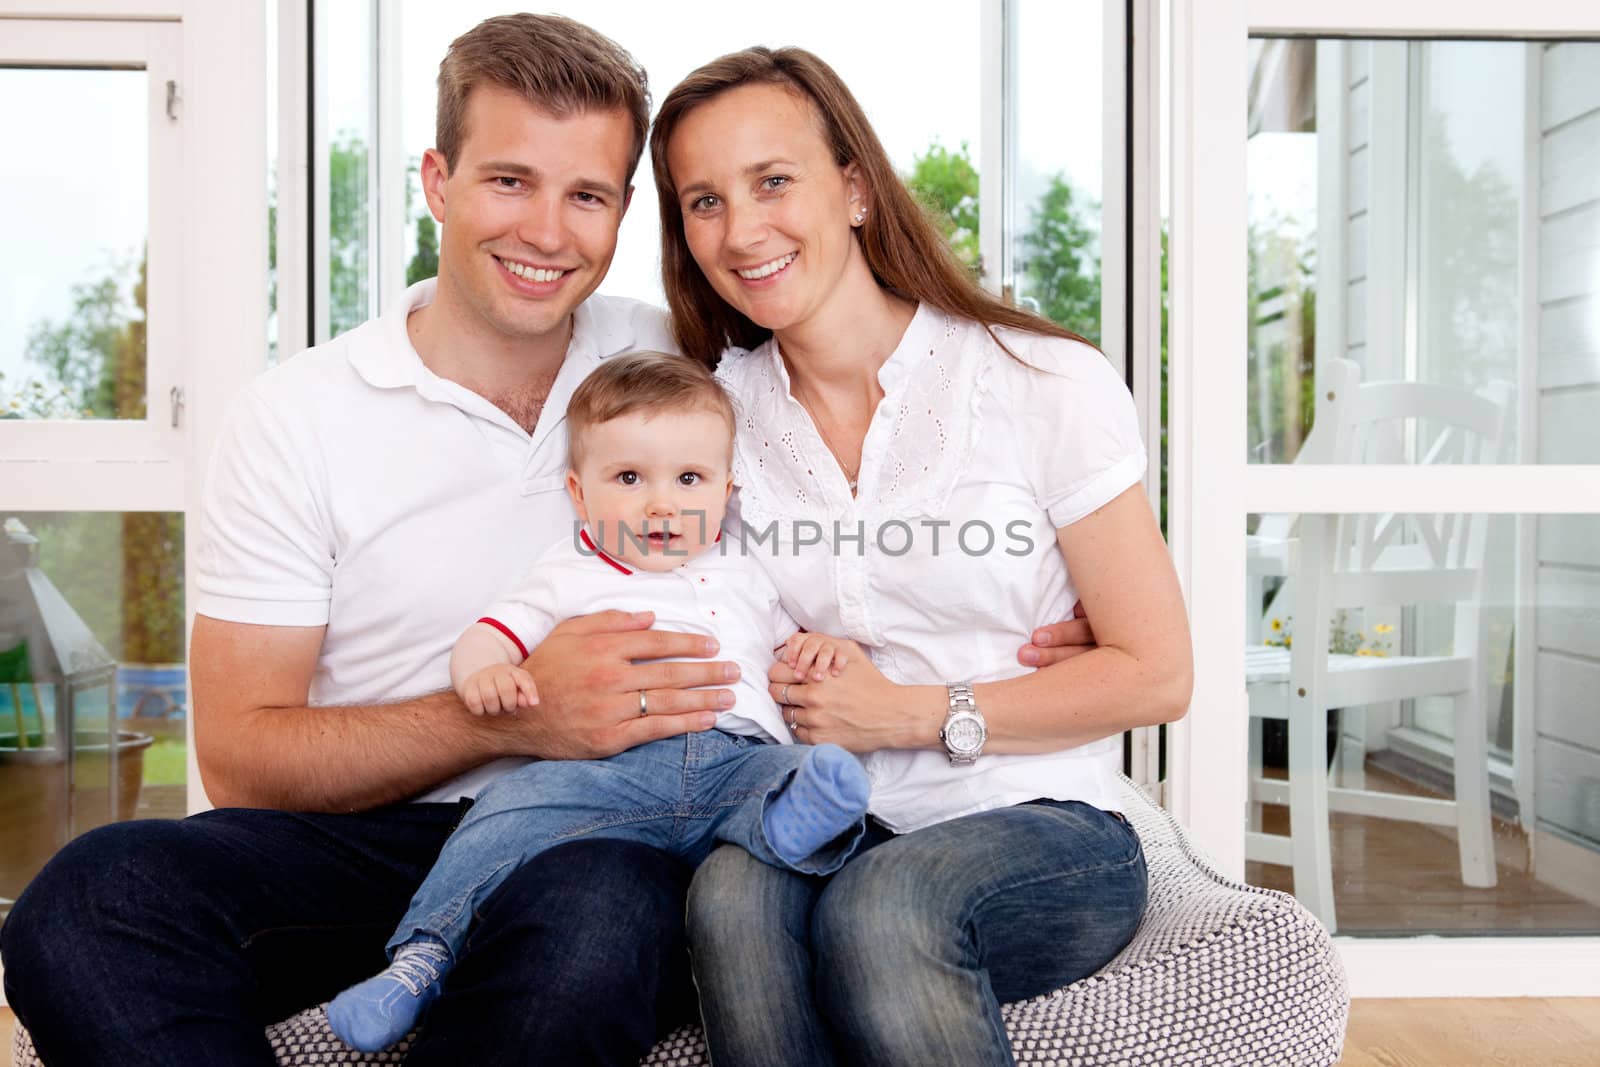 Portrait of a happy family looking at the camera in a home interior